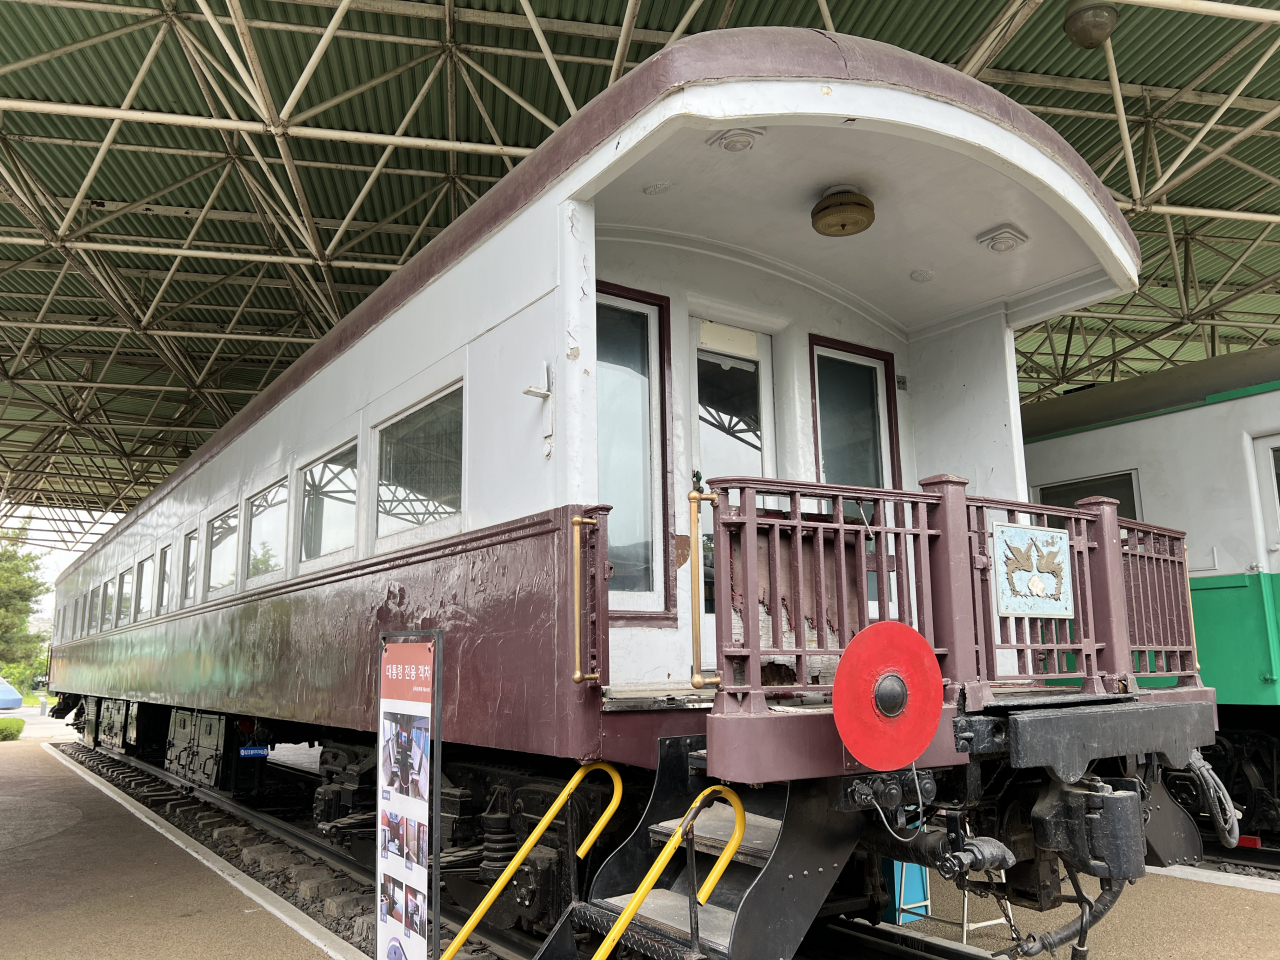 A special train carriage used by presidents, Cultural Heritage No. 419 (Kim Hae-yeon/ The Korea Herald)